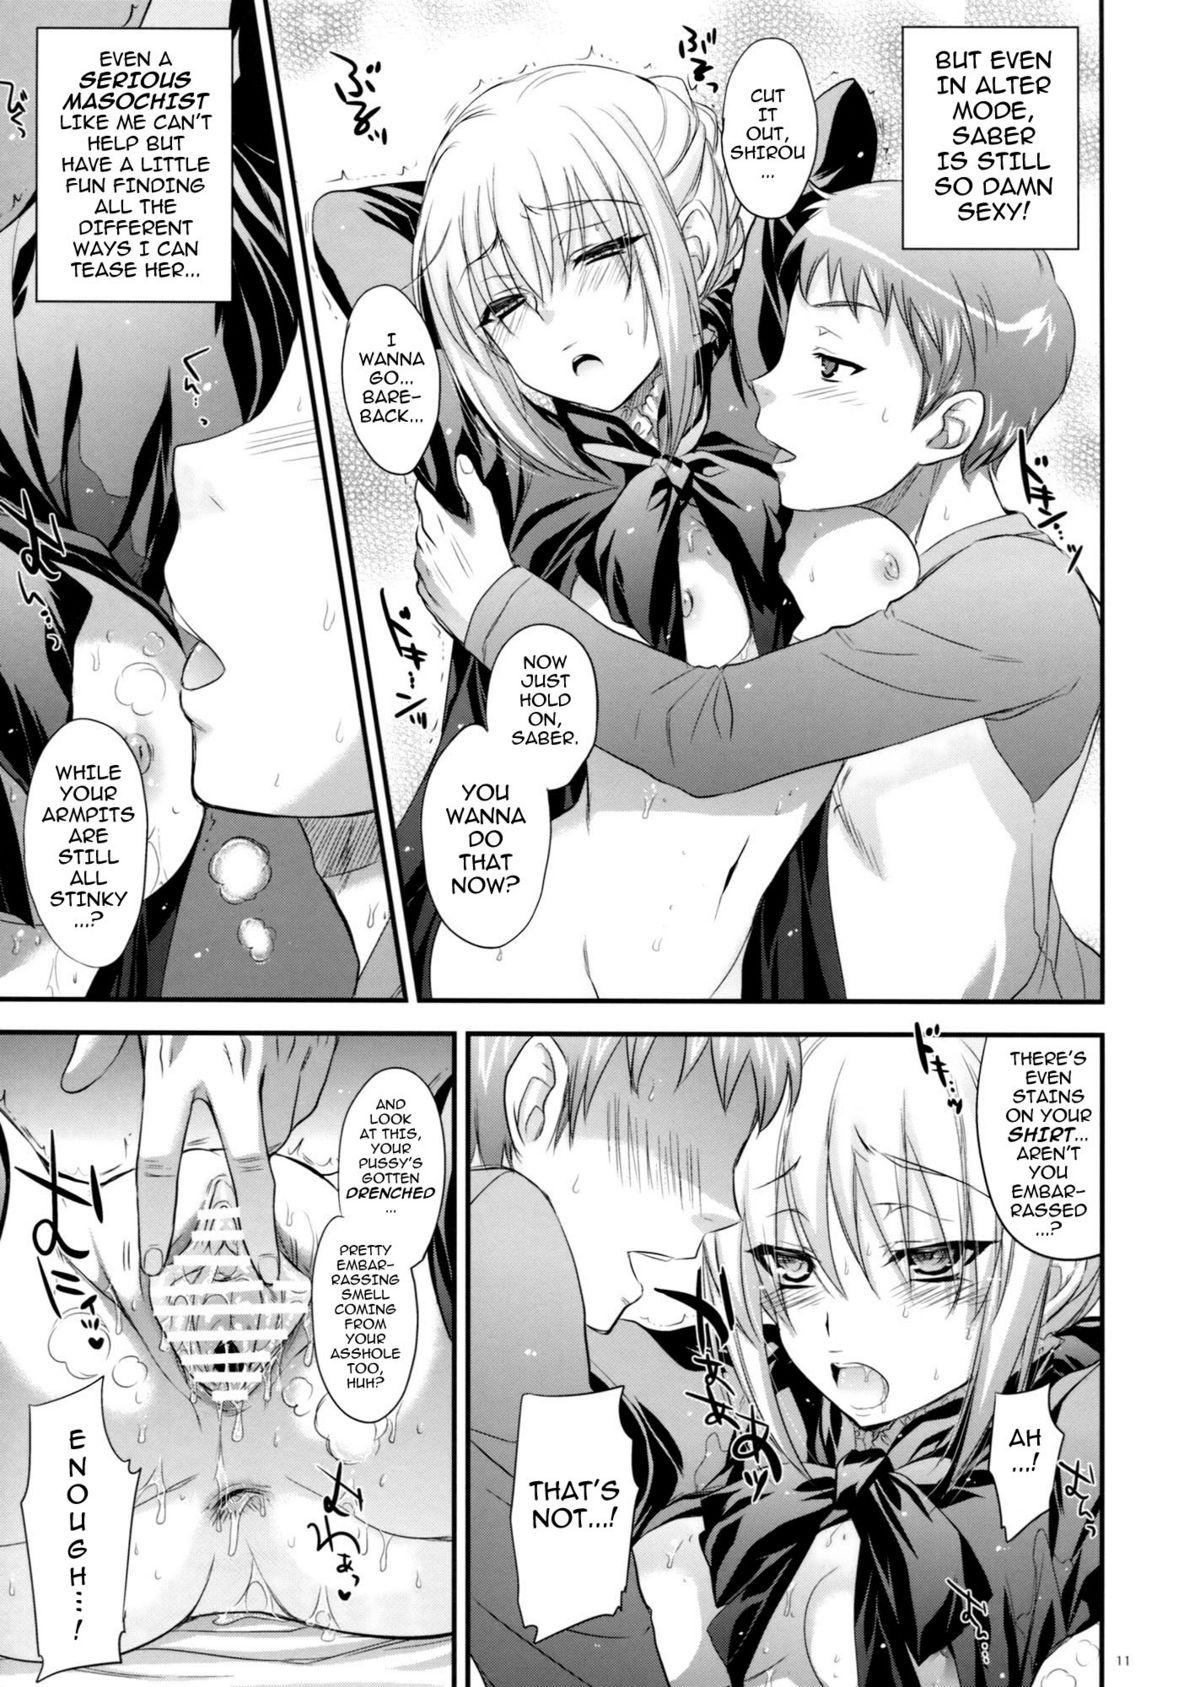 Lips GARIGARI 41 - Fate stay night Free Real Porn - Page 10